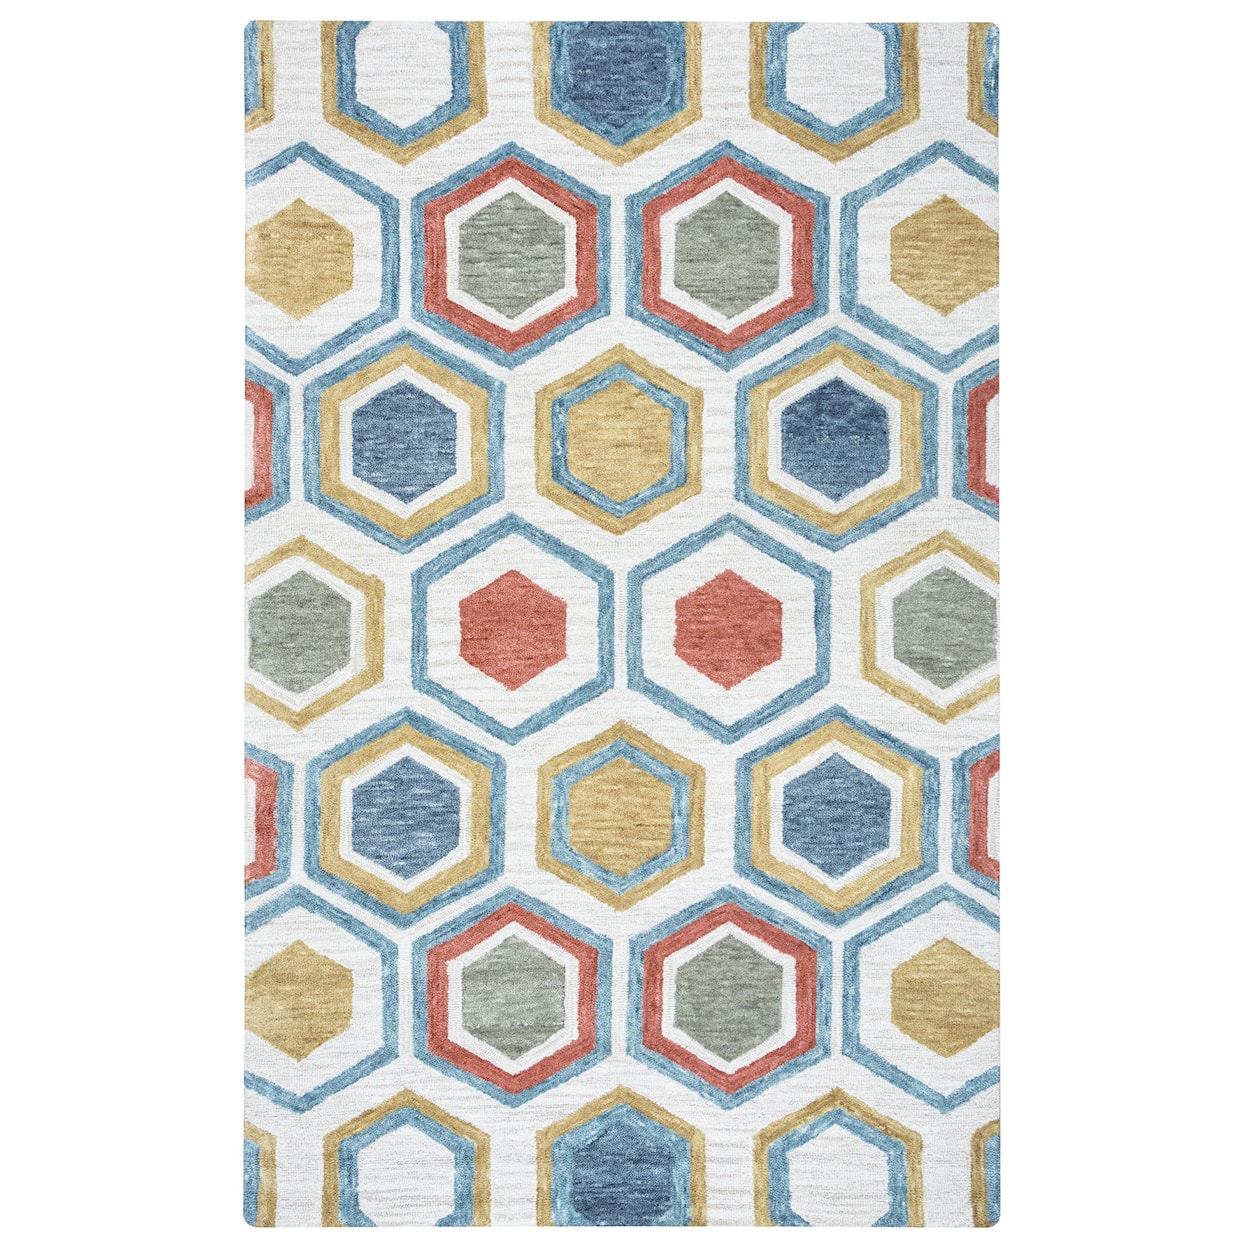 Rizzy Home Lancaster 9' x 12' Rectangle Rug